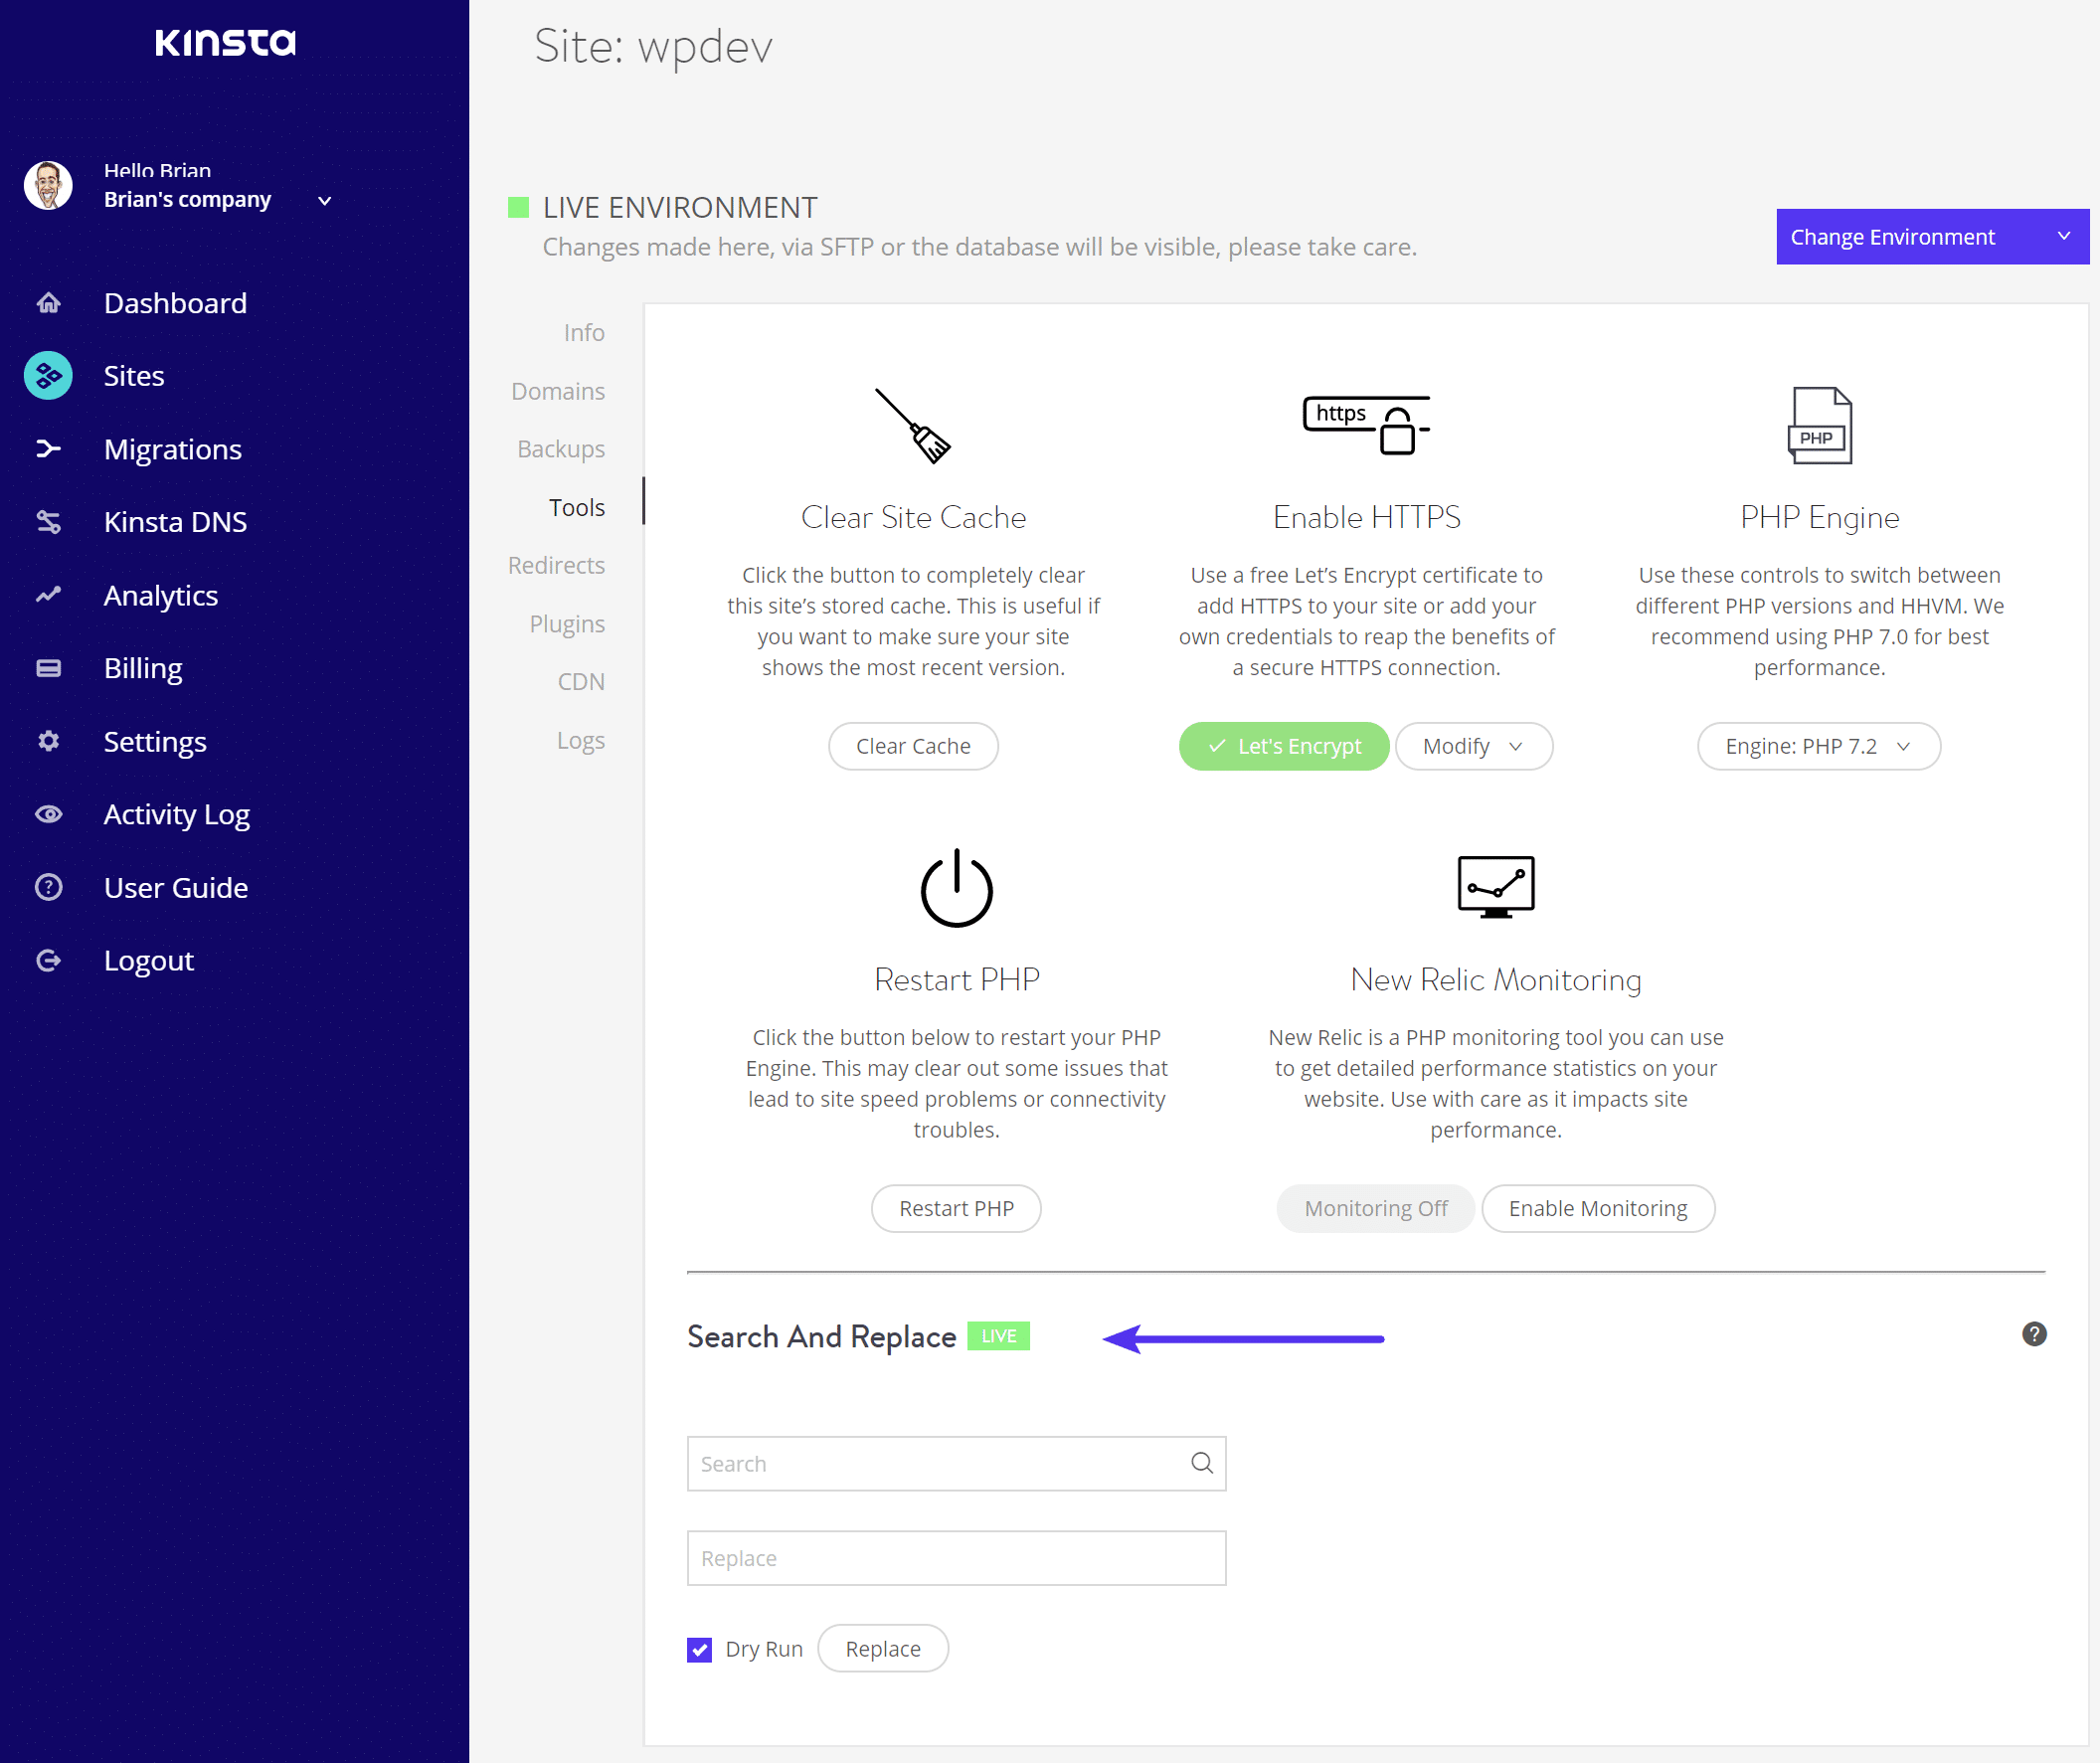 Kinsta search and replace tool